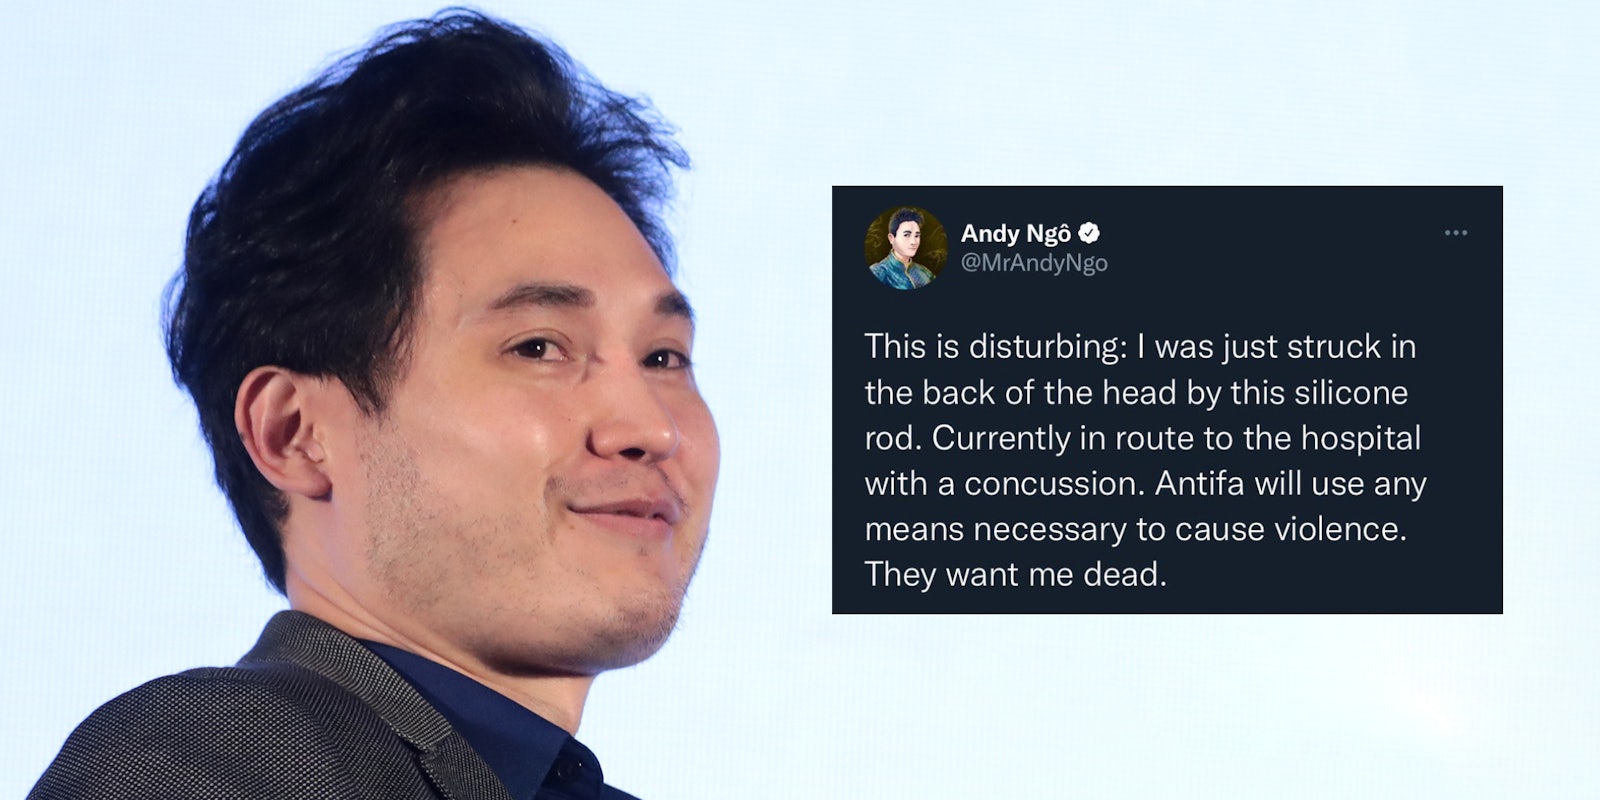 Andy Ngo with fake tweet 'This is disturbing: I was just struck in the back of the head by this silicone rod. Currently in route to the hospital with a concussion. Antifa will use any means necessary to cause violence. They want me dead.'